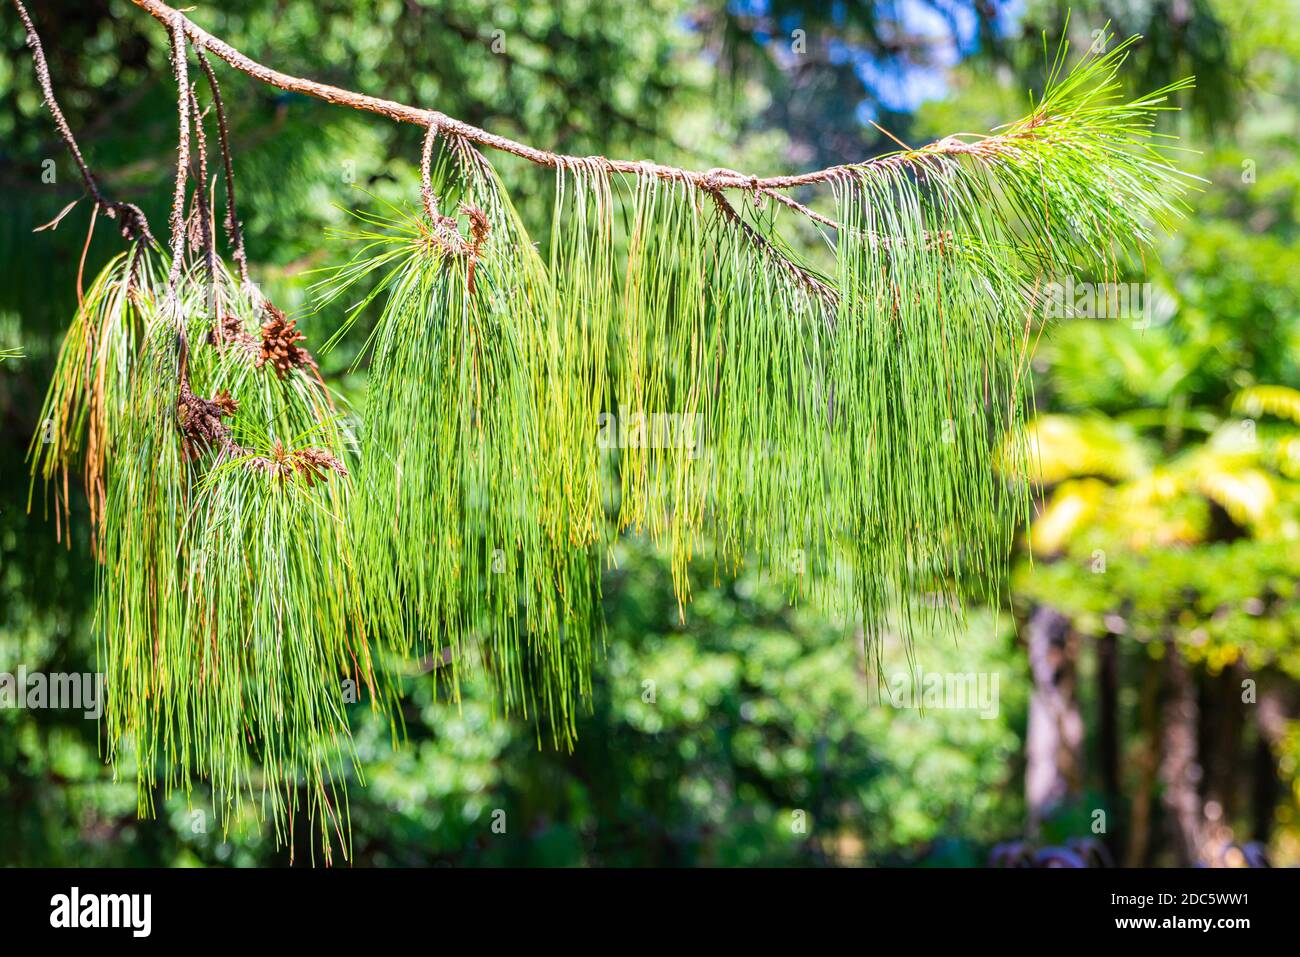 Pinus patula. Pinus strobus pine with a weeping crown. Stock Photo